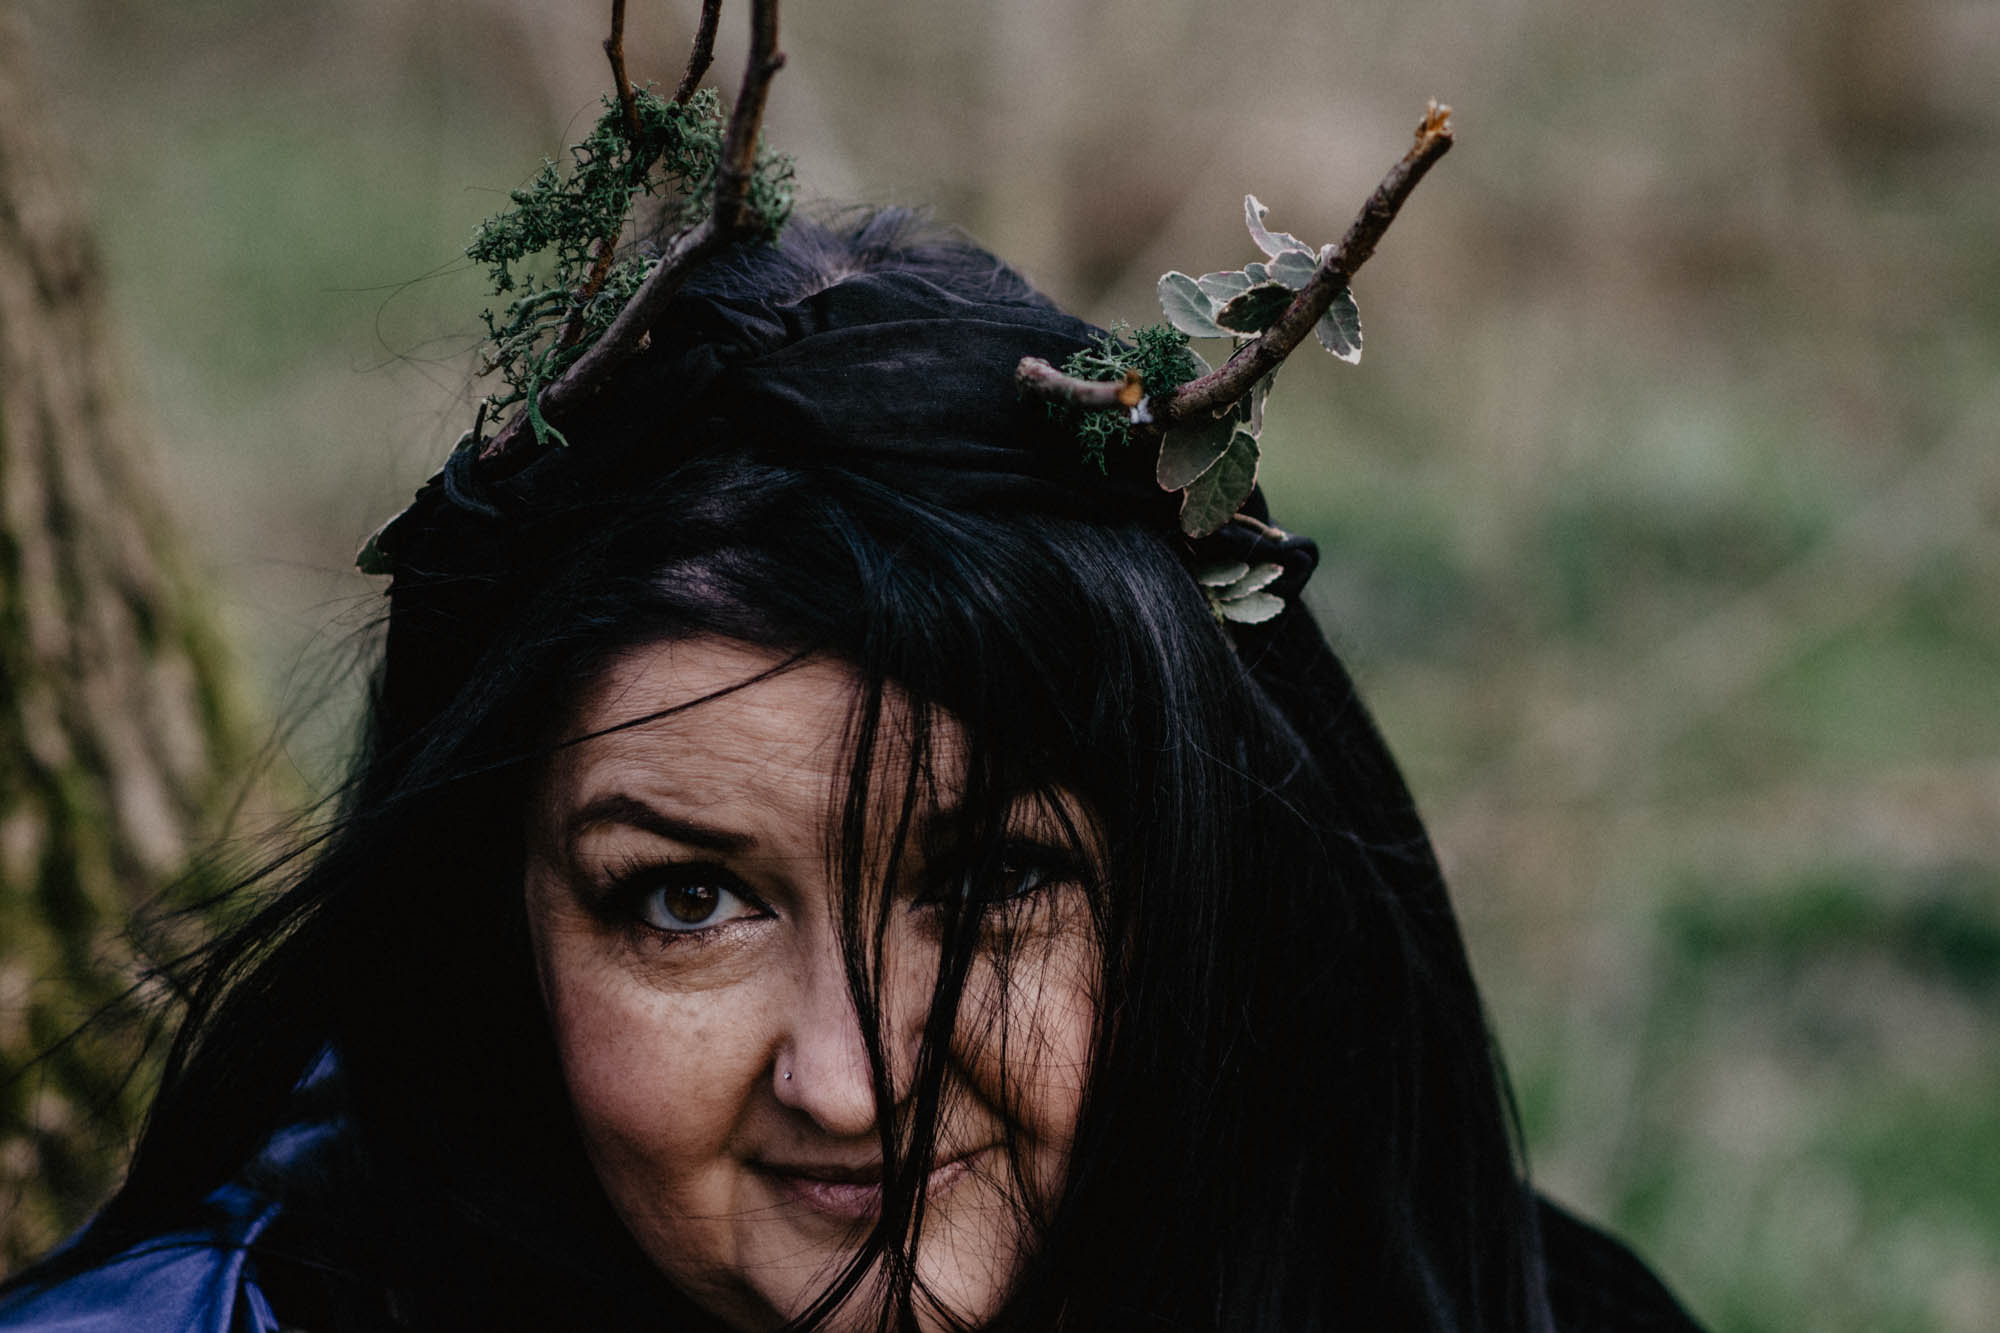 Create accessories that speak your personality, like this pagan headpiece made with moss and twigs